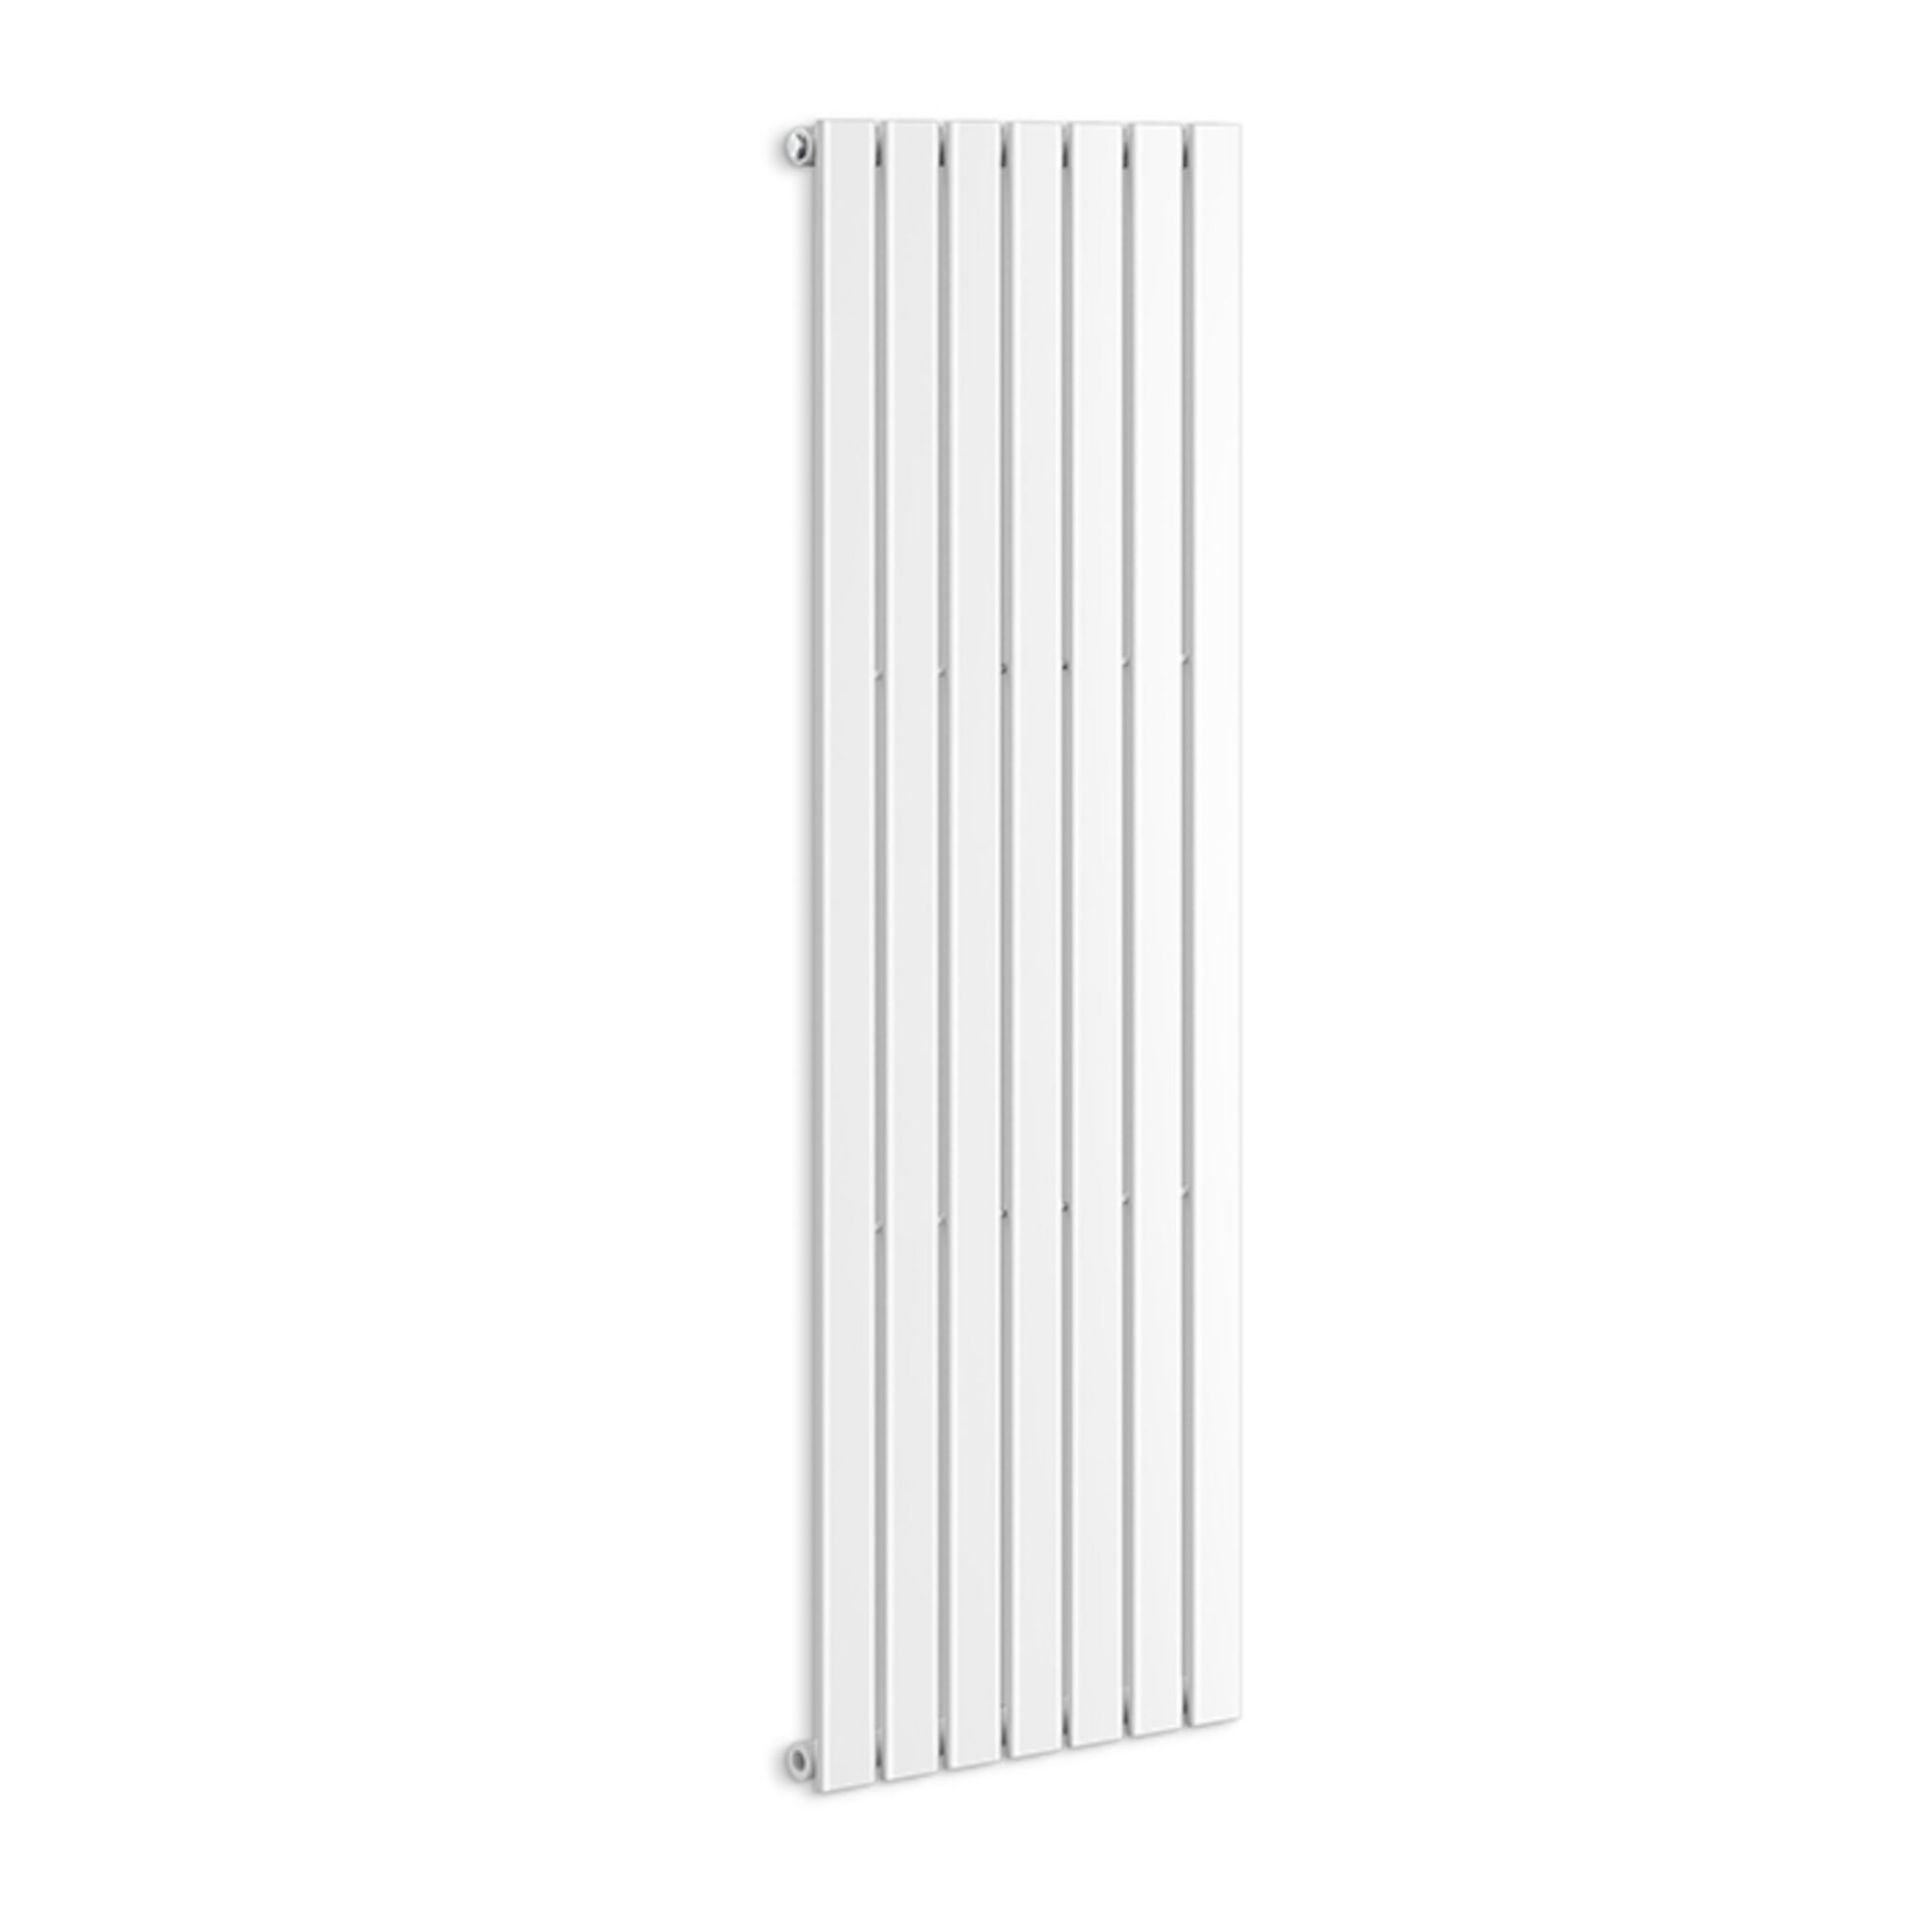 (CS16) 1600x532mm White Panel Vertical Radiator. RRP £249.99. Made from low carbon steel with a high